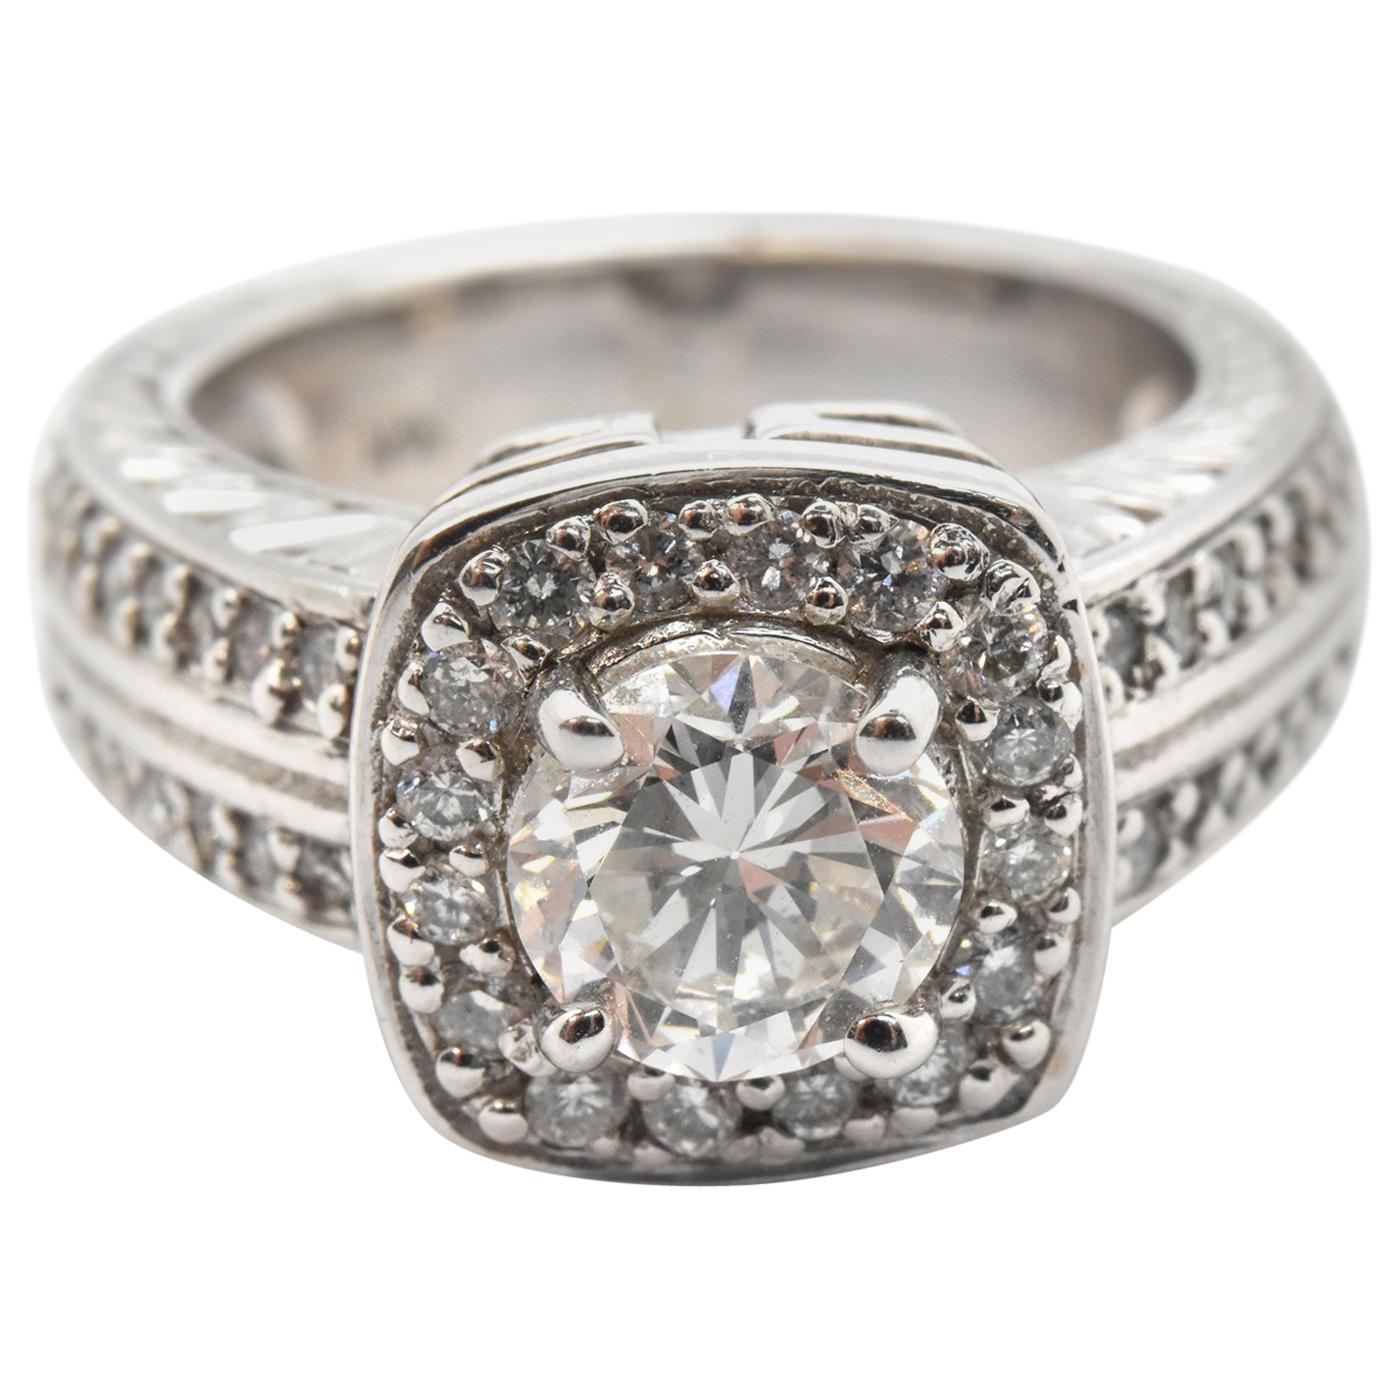 14 Karat White Gold and 0.78 Carat Round Diamond Ring with Accents